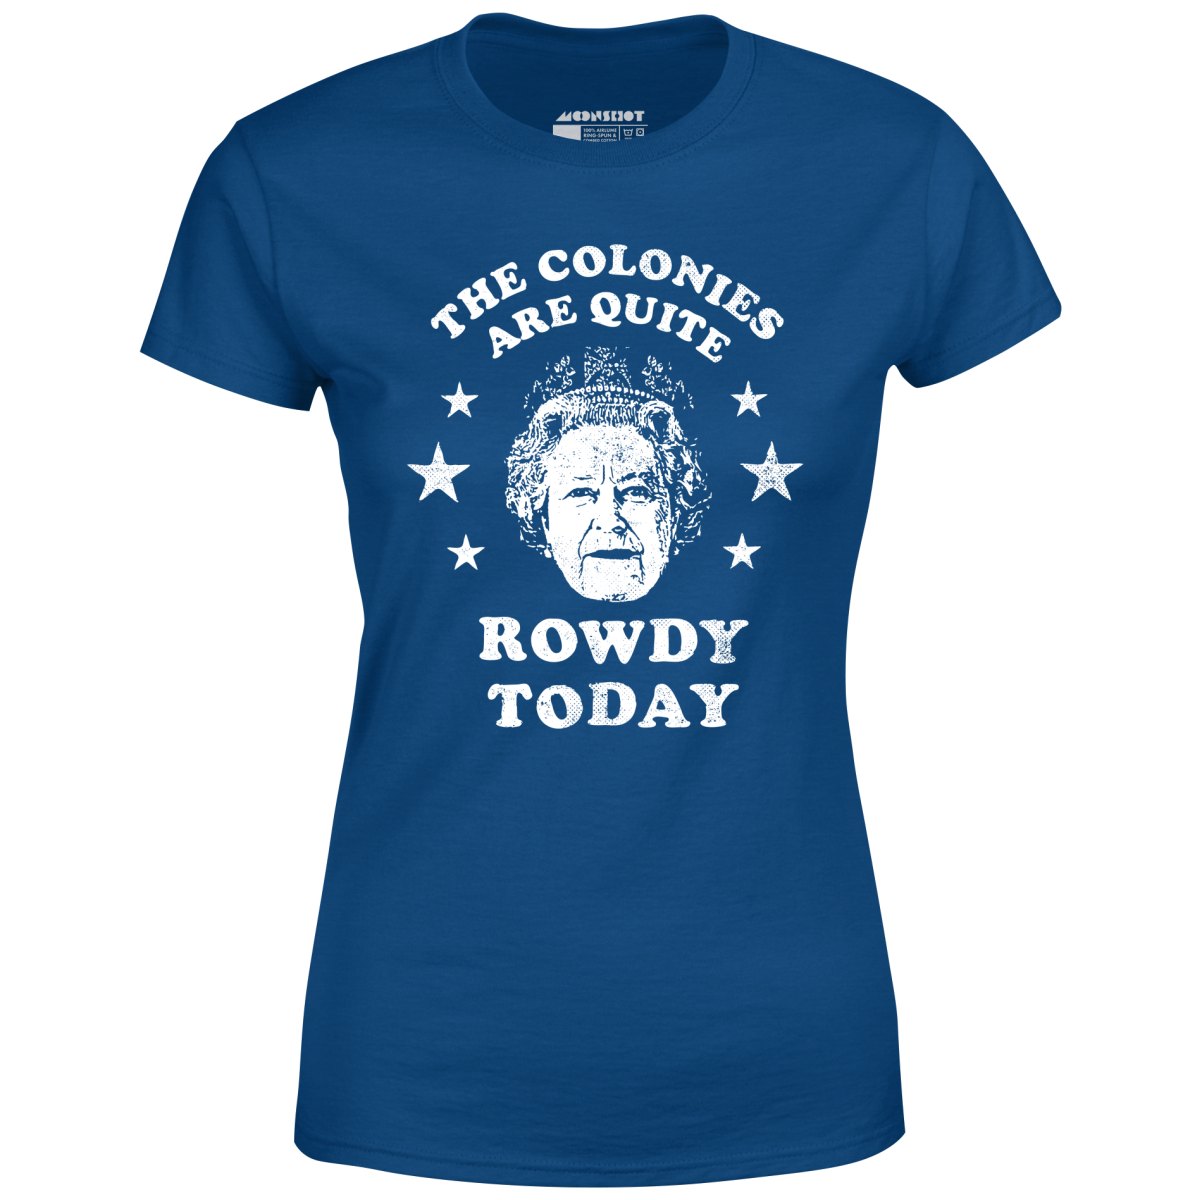 The Colonies Are Quite Rowdy Today - Women's T-Shirt